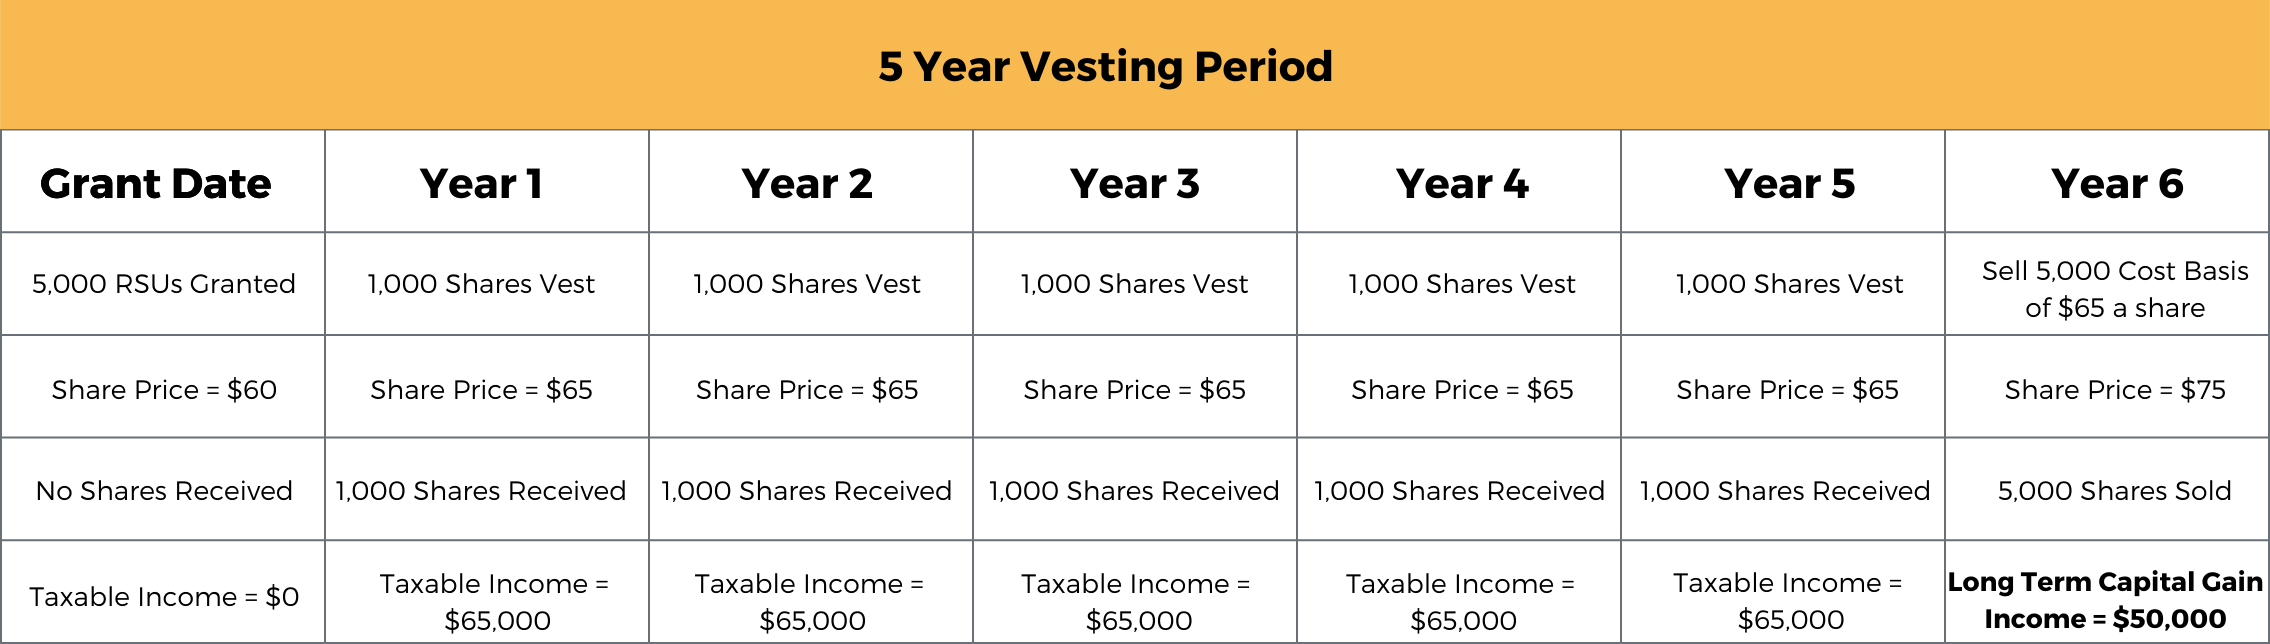 5 year vesting chart The Woodlands, TX